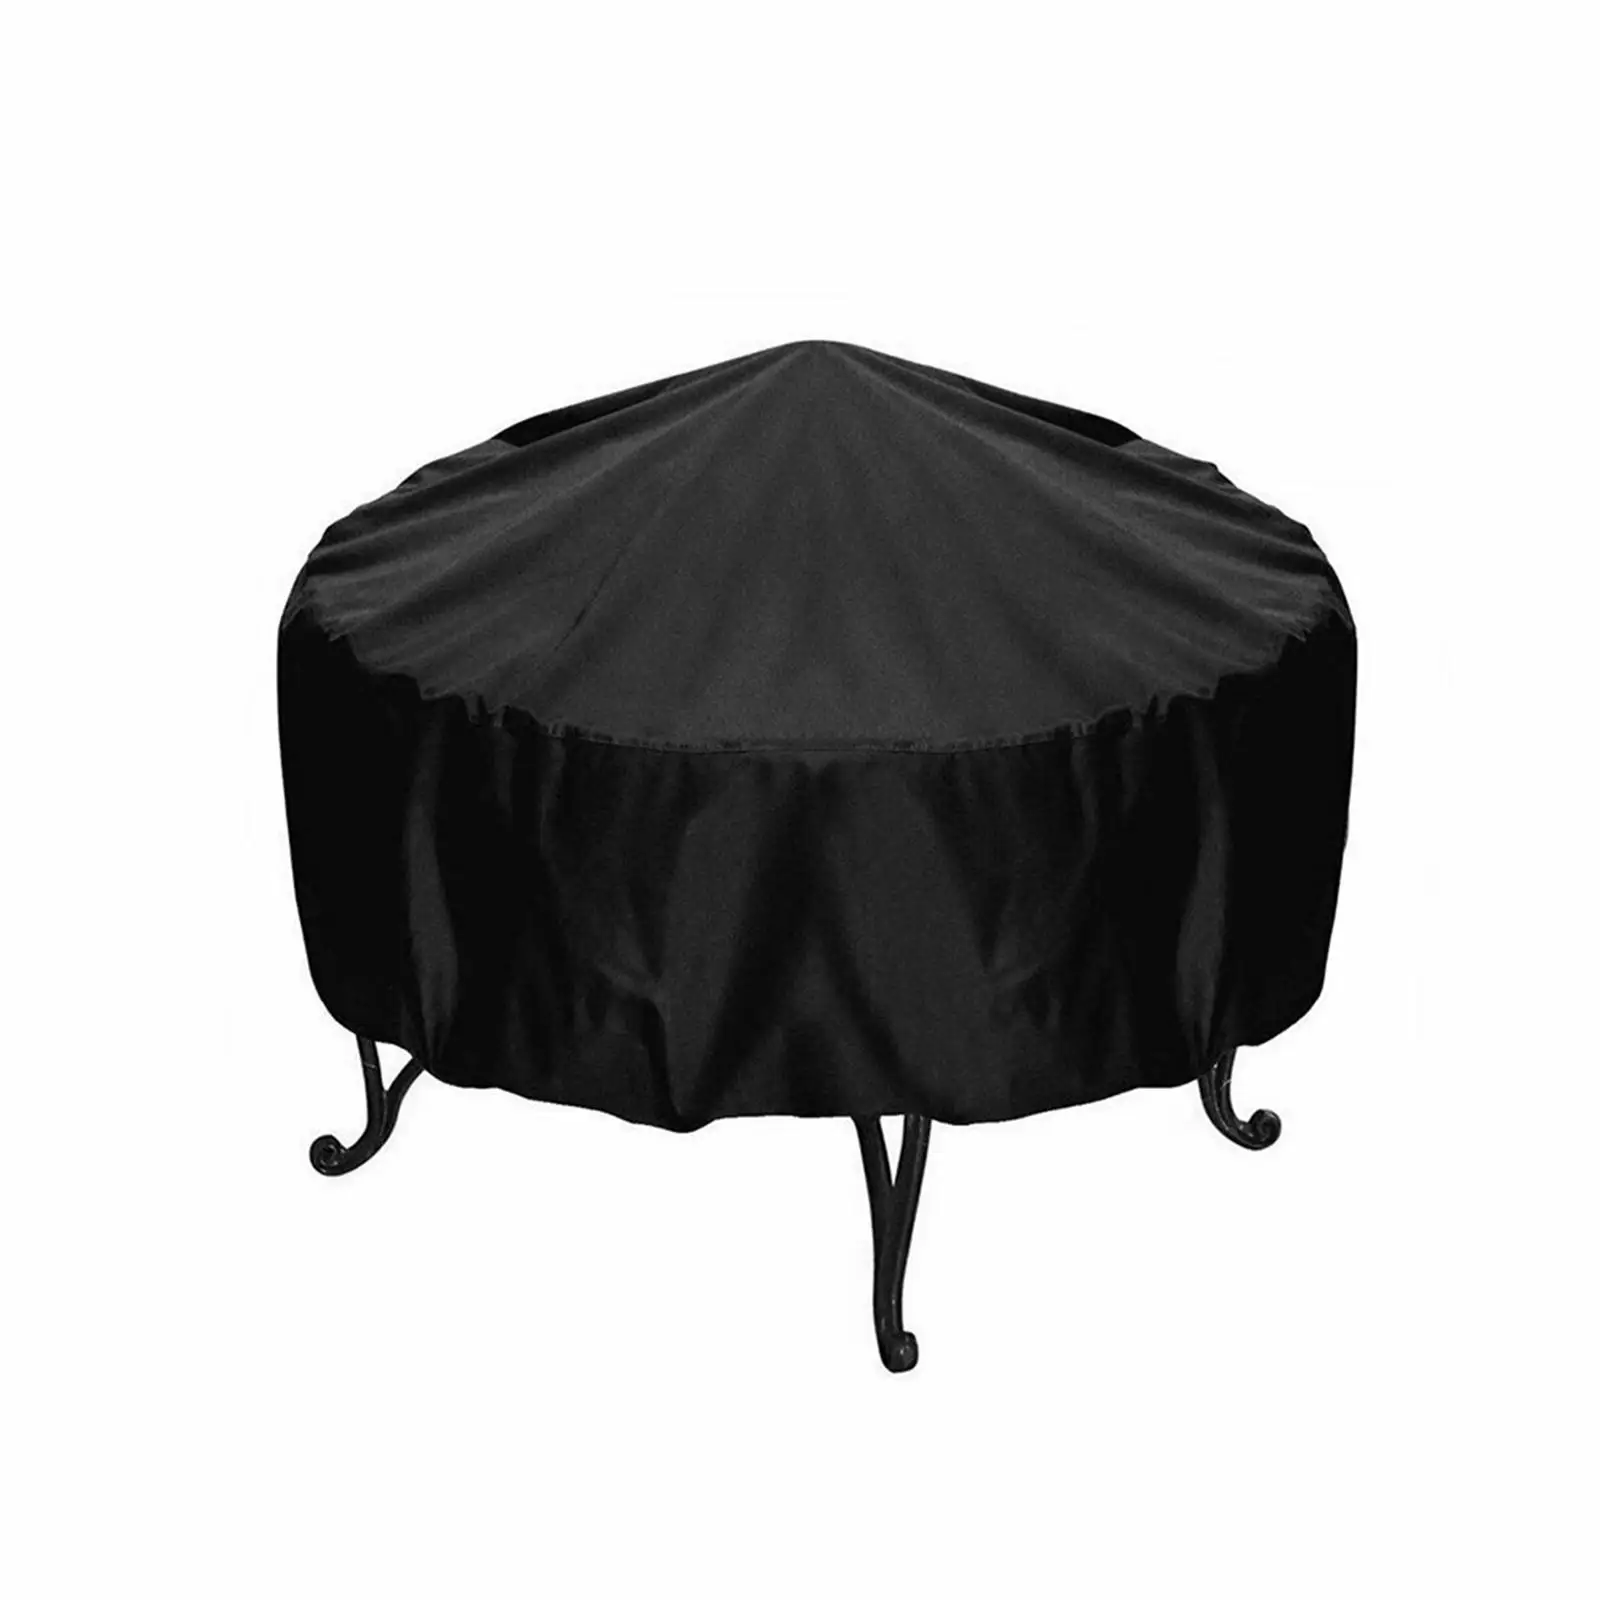 Round Barbecue Grill Cover Waterproof Windproof Foldable Dustproof Stove Shield Protective Cover for Patio camping Accessory